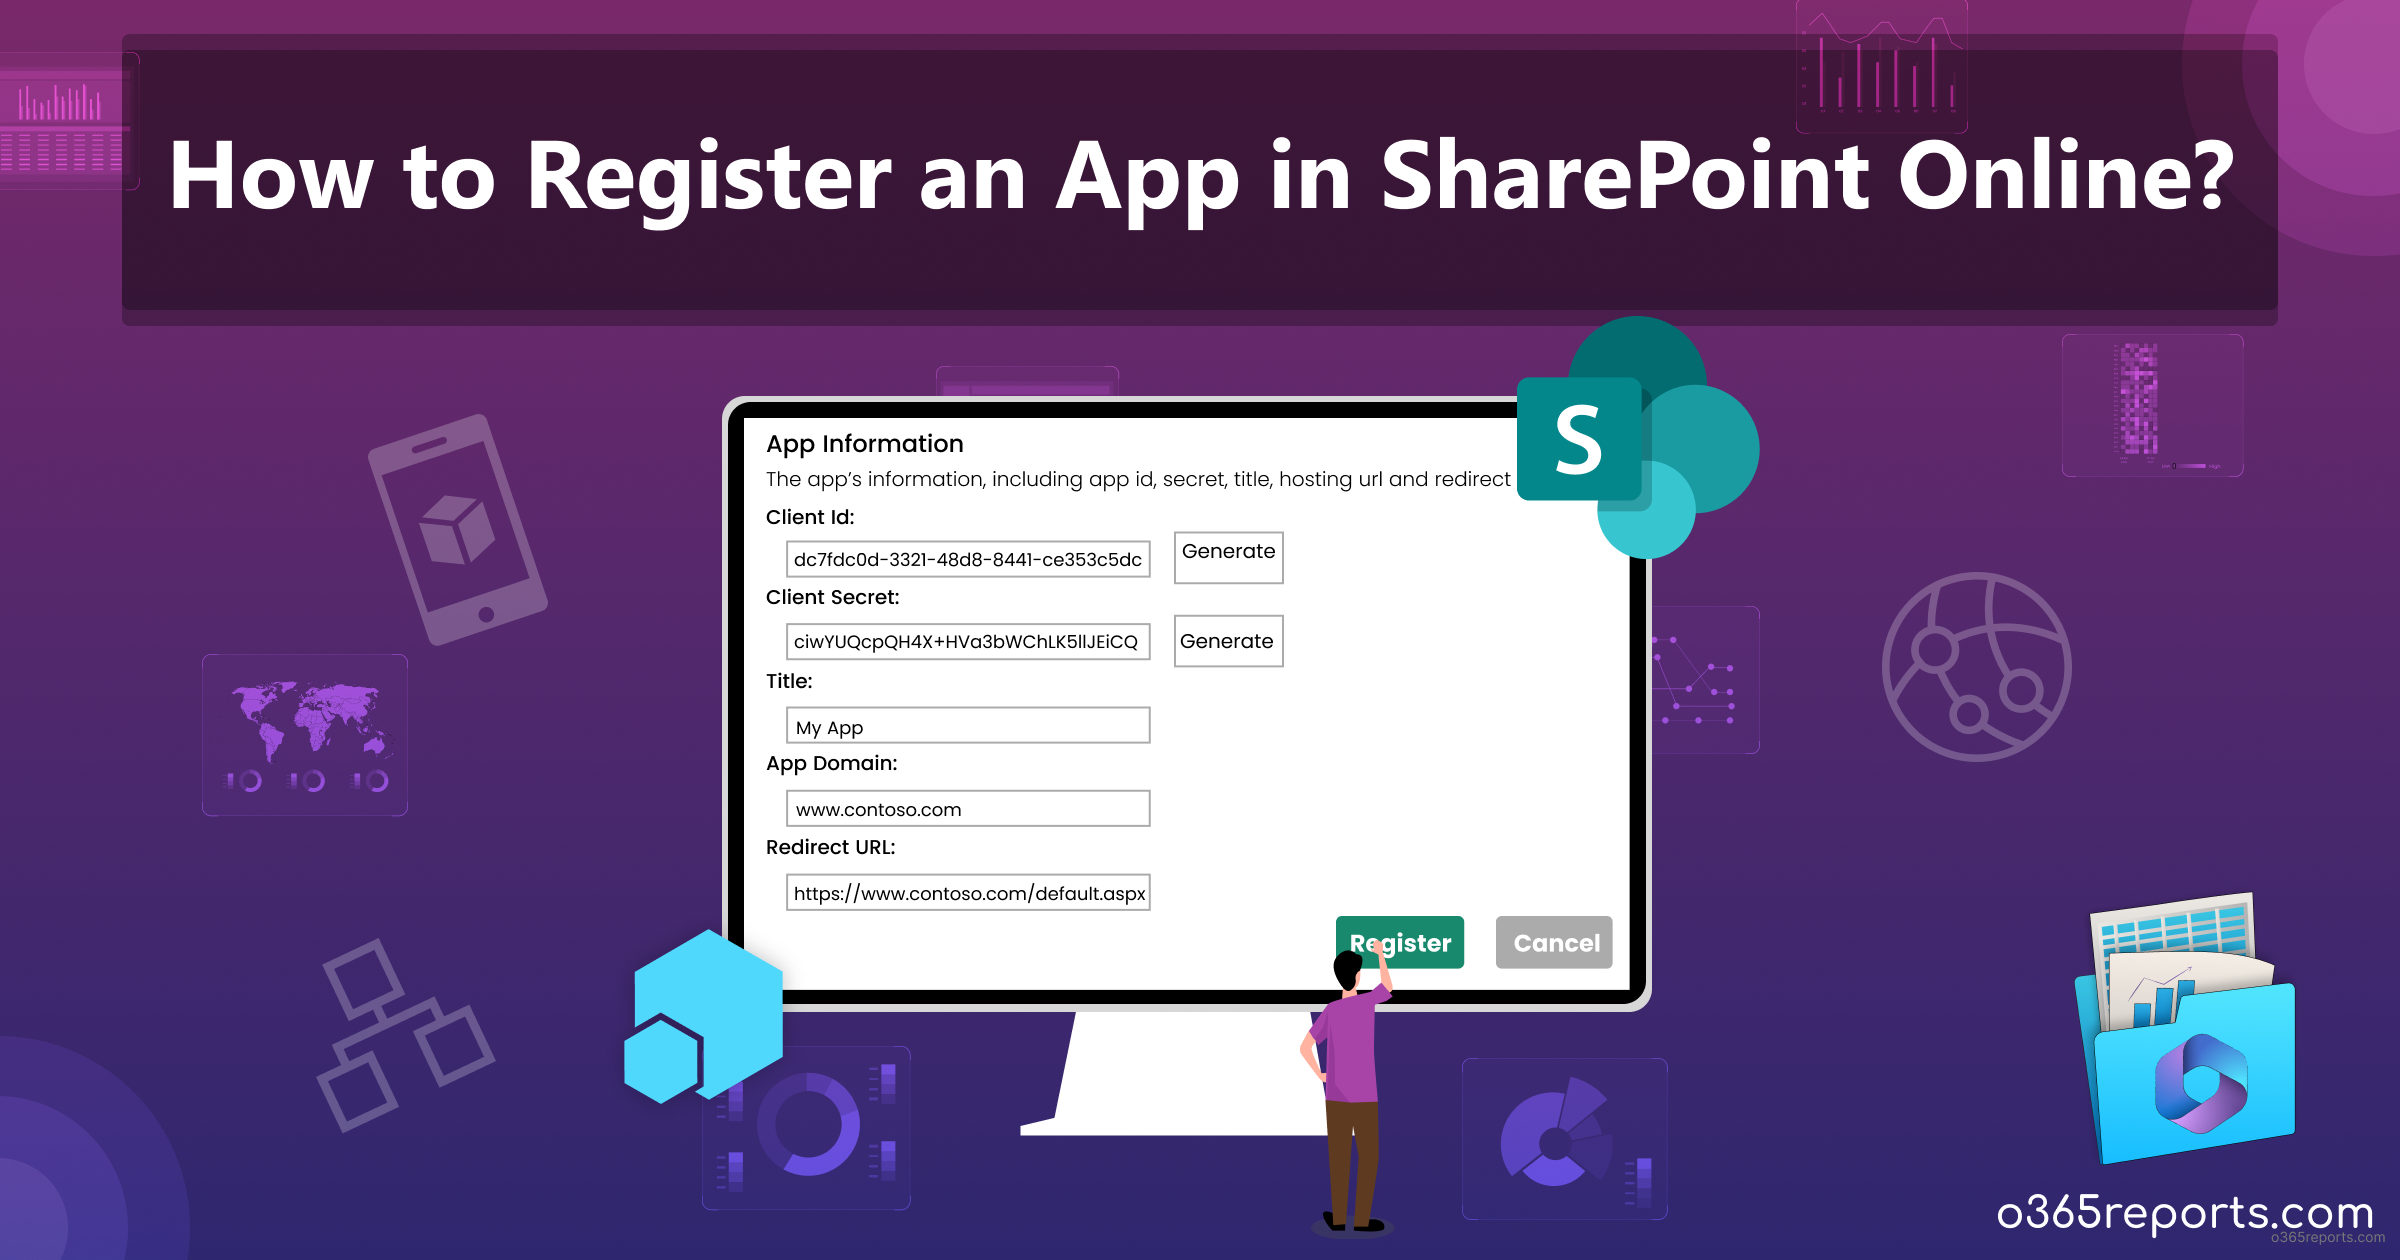 How to Register an App in SharePoint Online